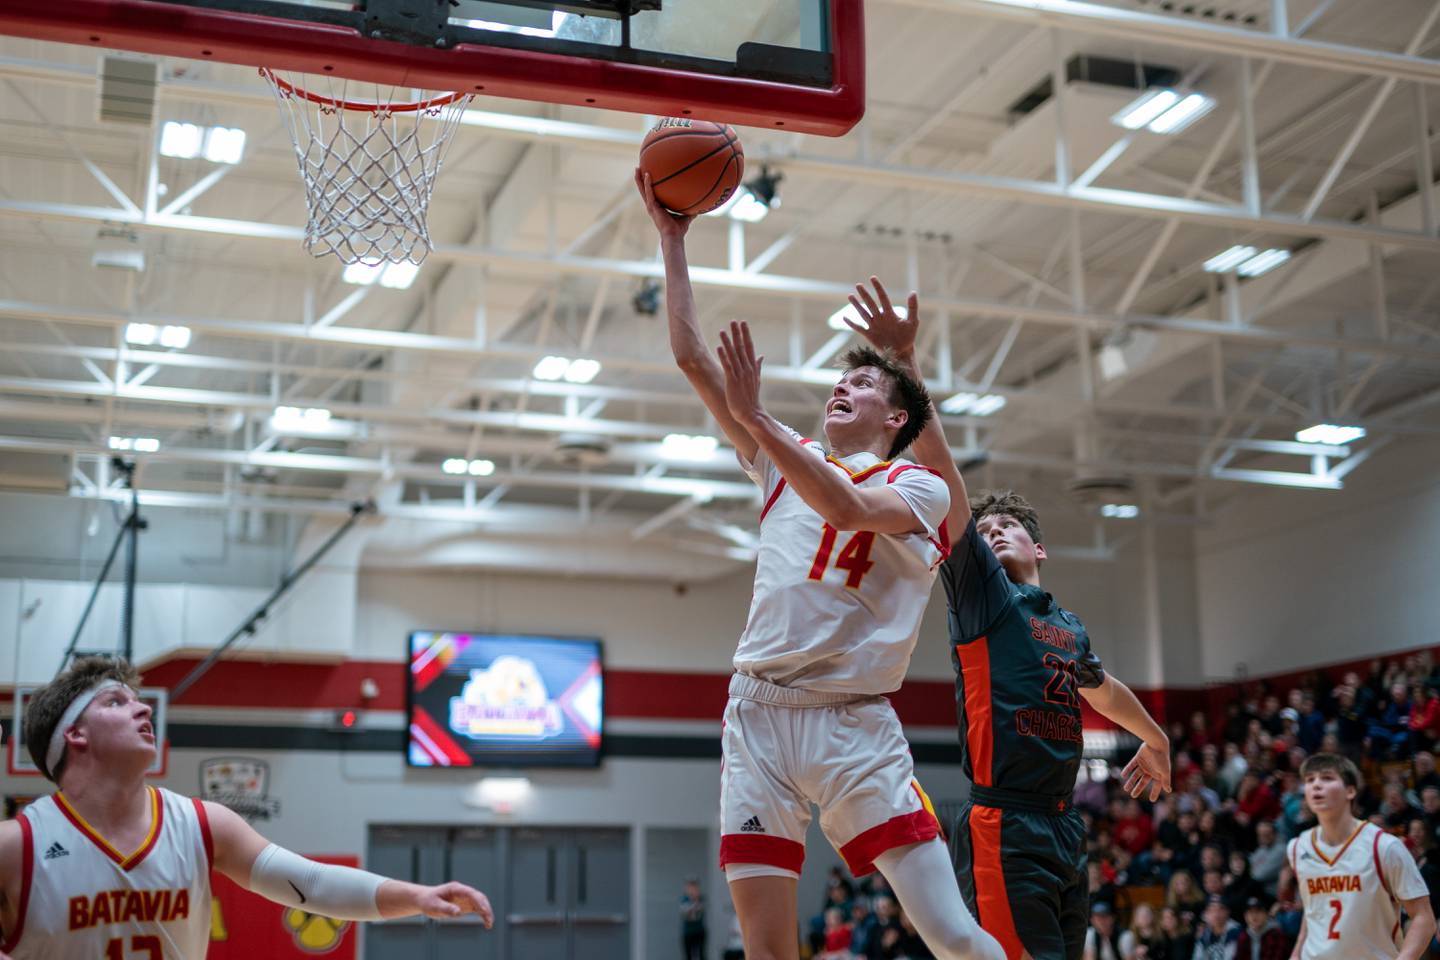 Batavia’s Jack Ambrose (14) drives to the basket against St. Charles East's Jacob Vrankovich (21) during a basketball game at Batavia High School on Friday, Feb 10, 2023.